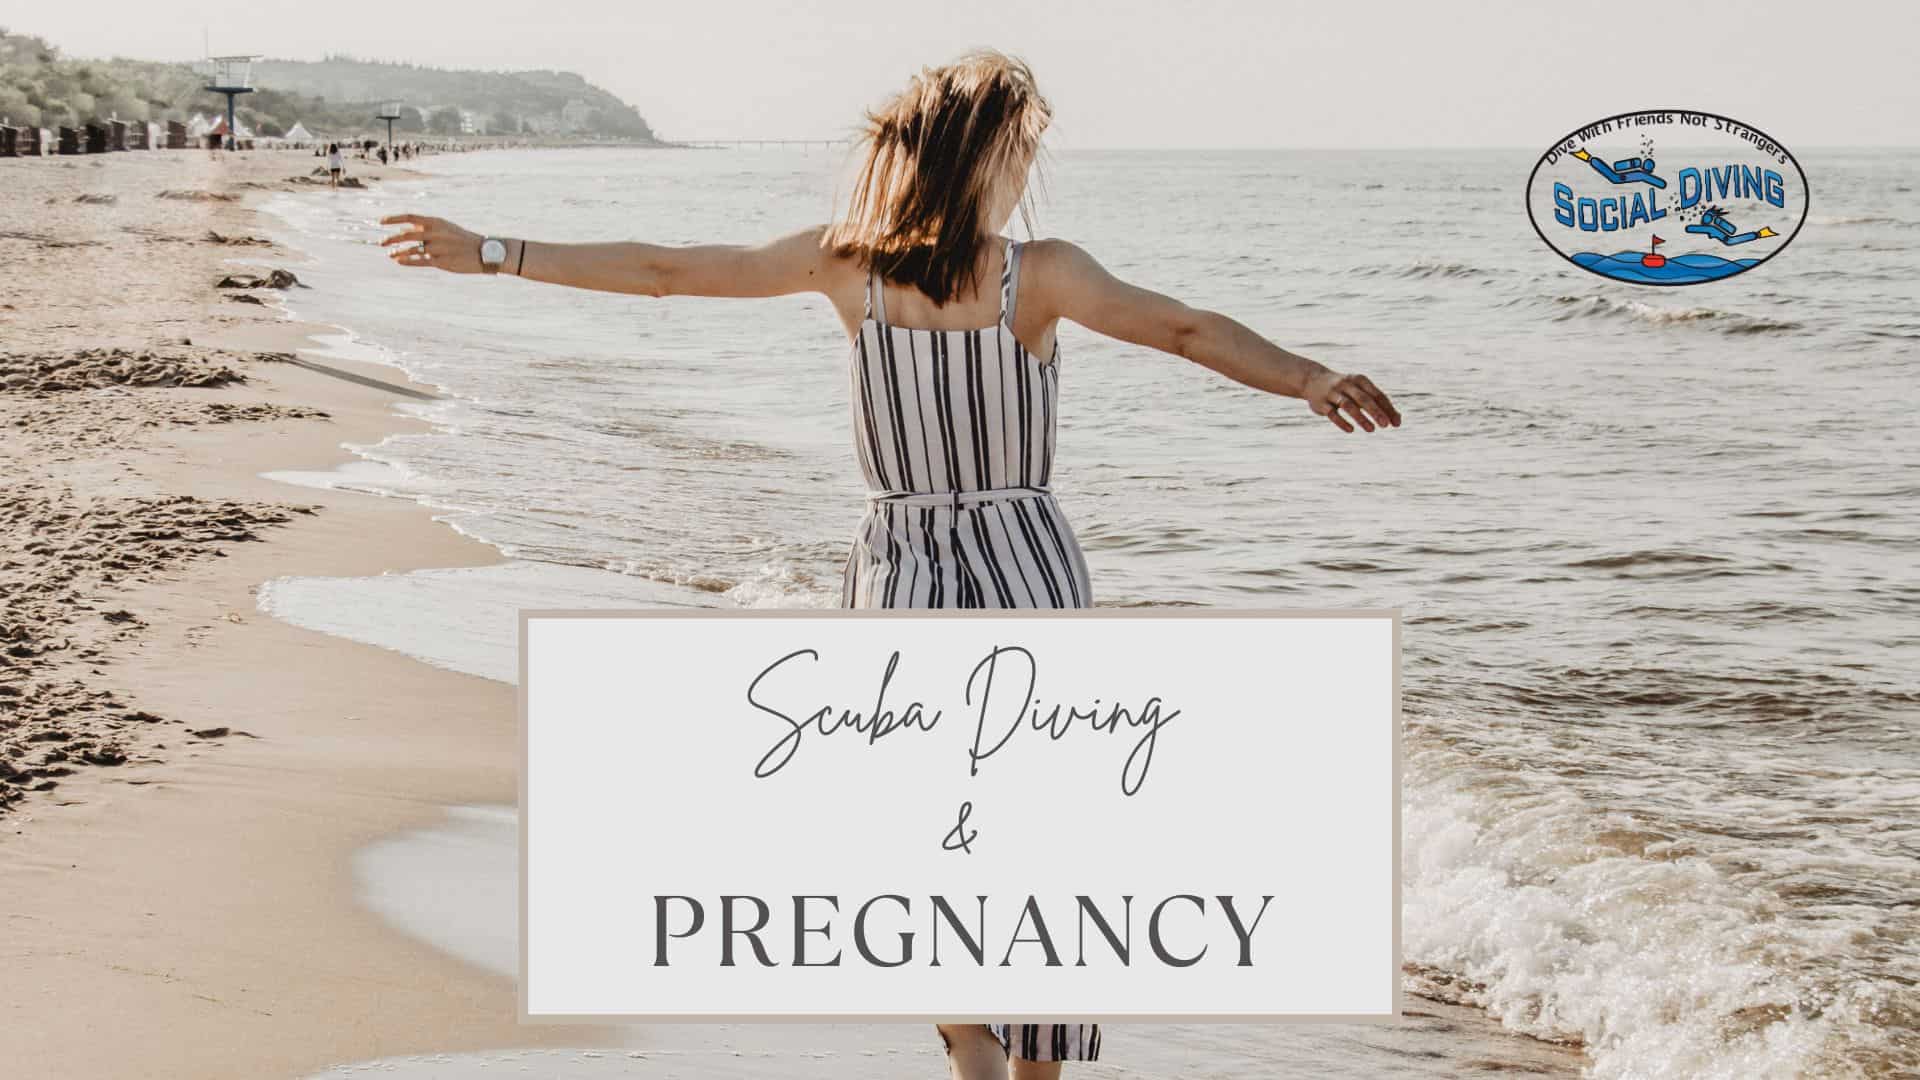 Scuba Diving and Pregnancy